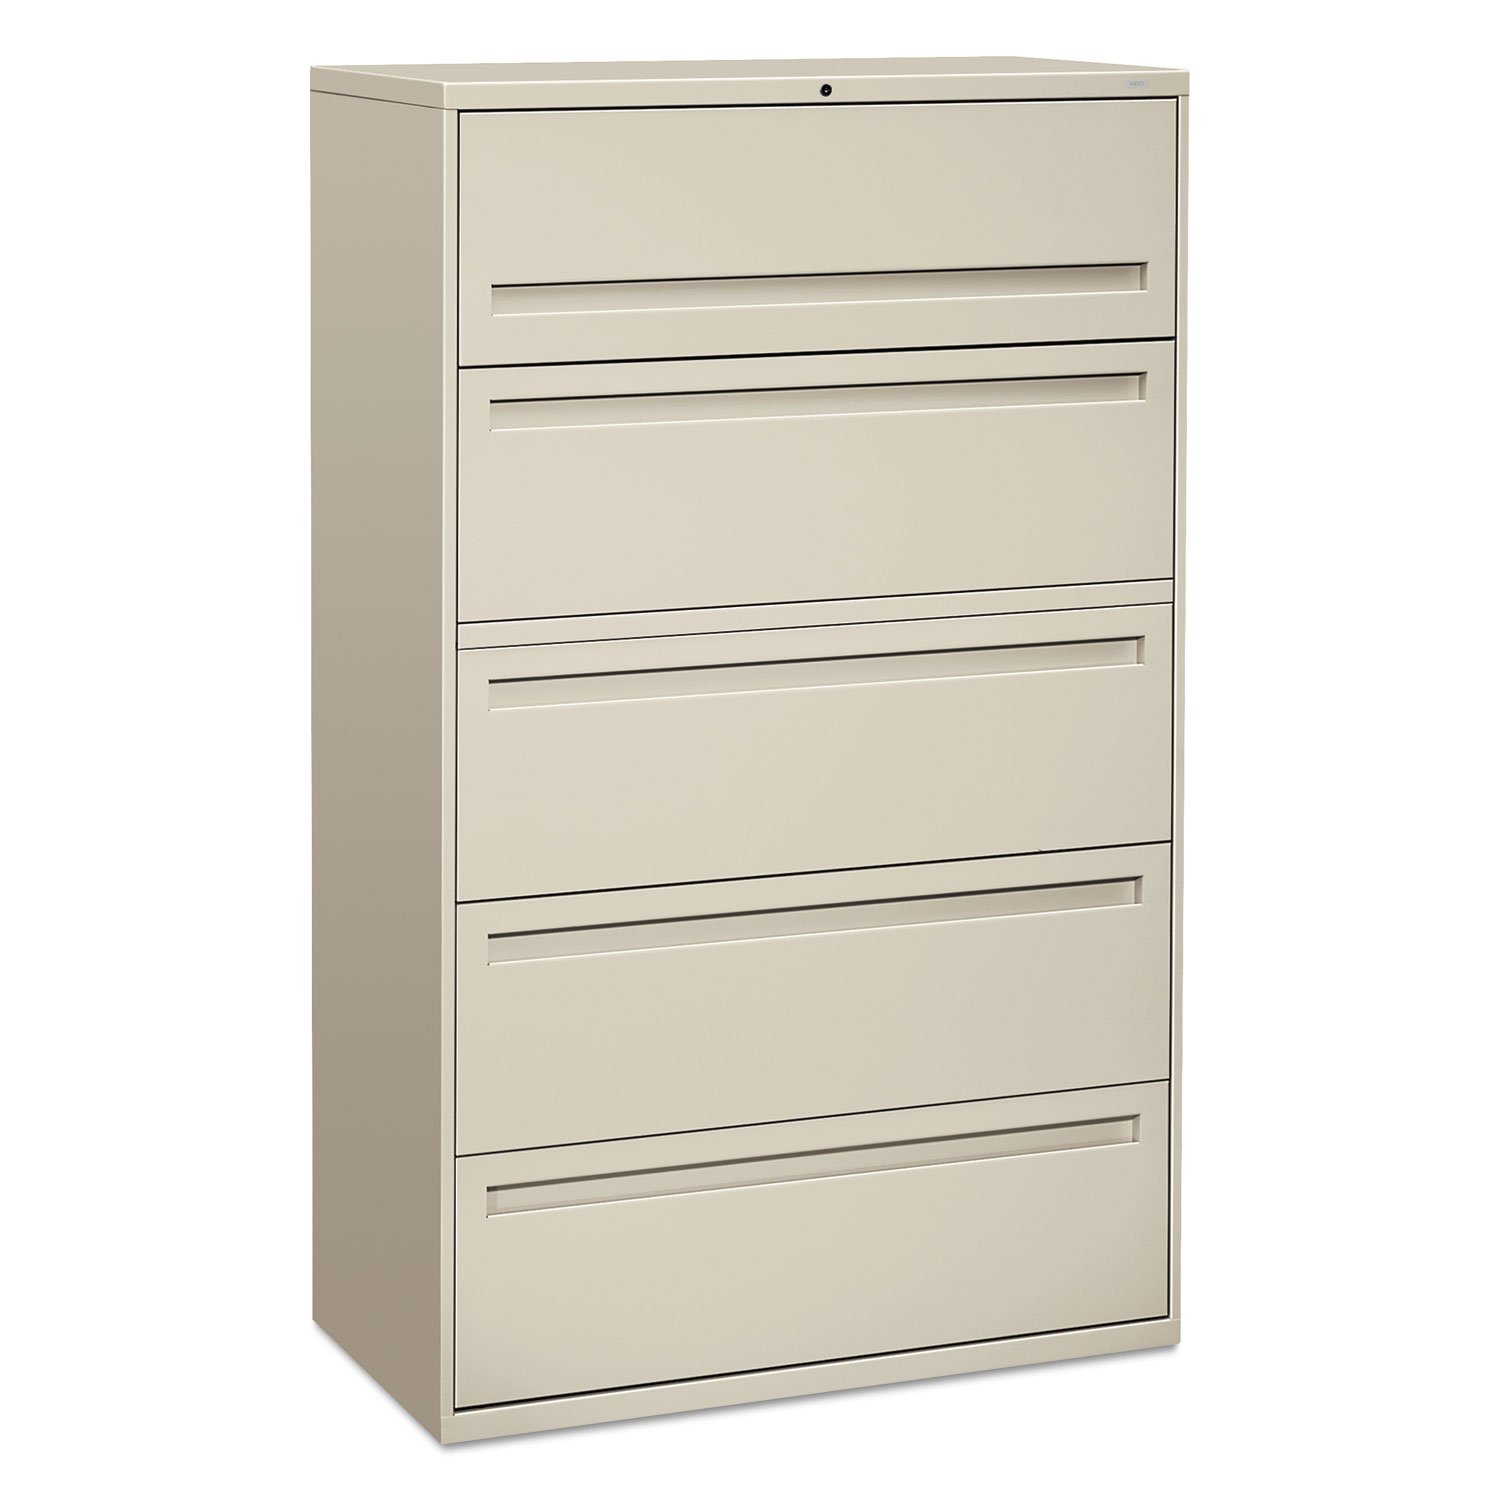  HON H795.L.Q 700 Series Five-Drawer Lateral File with Roll-Out Shelves, 42w x 18d x 64.25h, Light Gray (HON795LQ) 